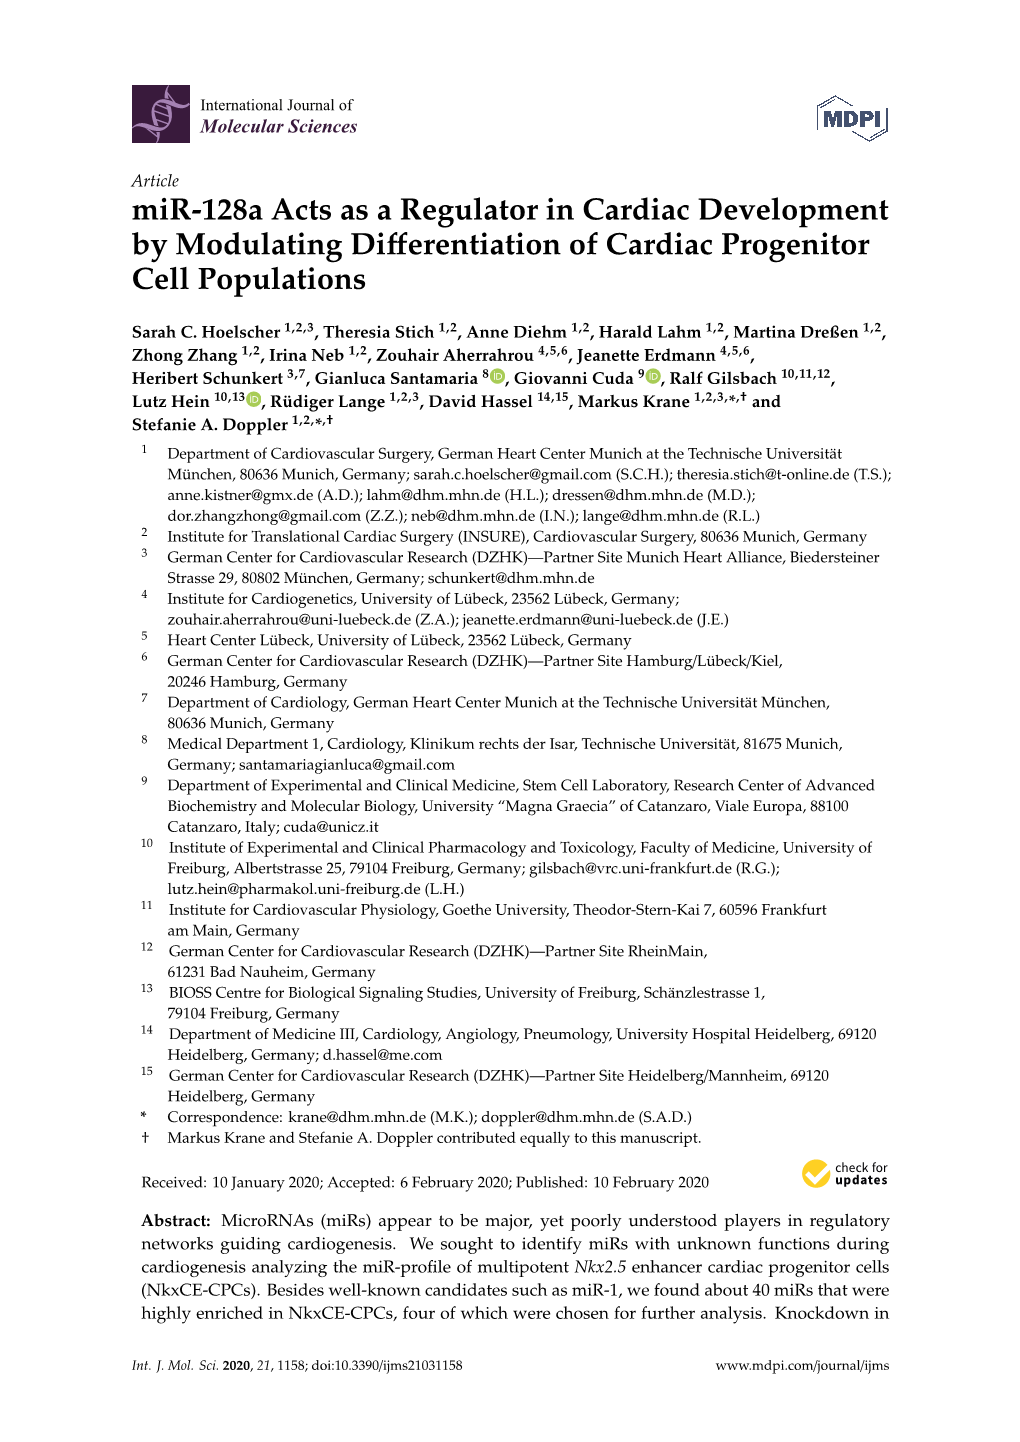 Mir-128A Acts As a Regulator in Cardiac Development by Modulating Differentiation of Cardiac Progenitor Cell Populations